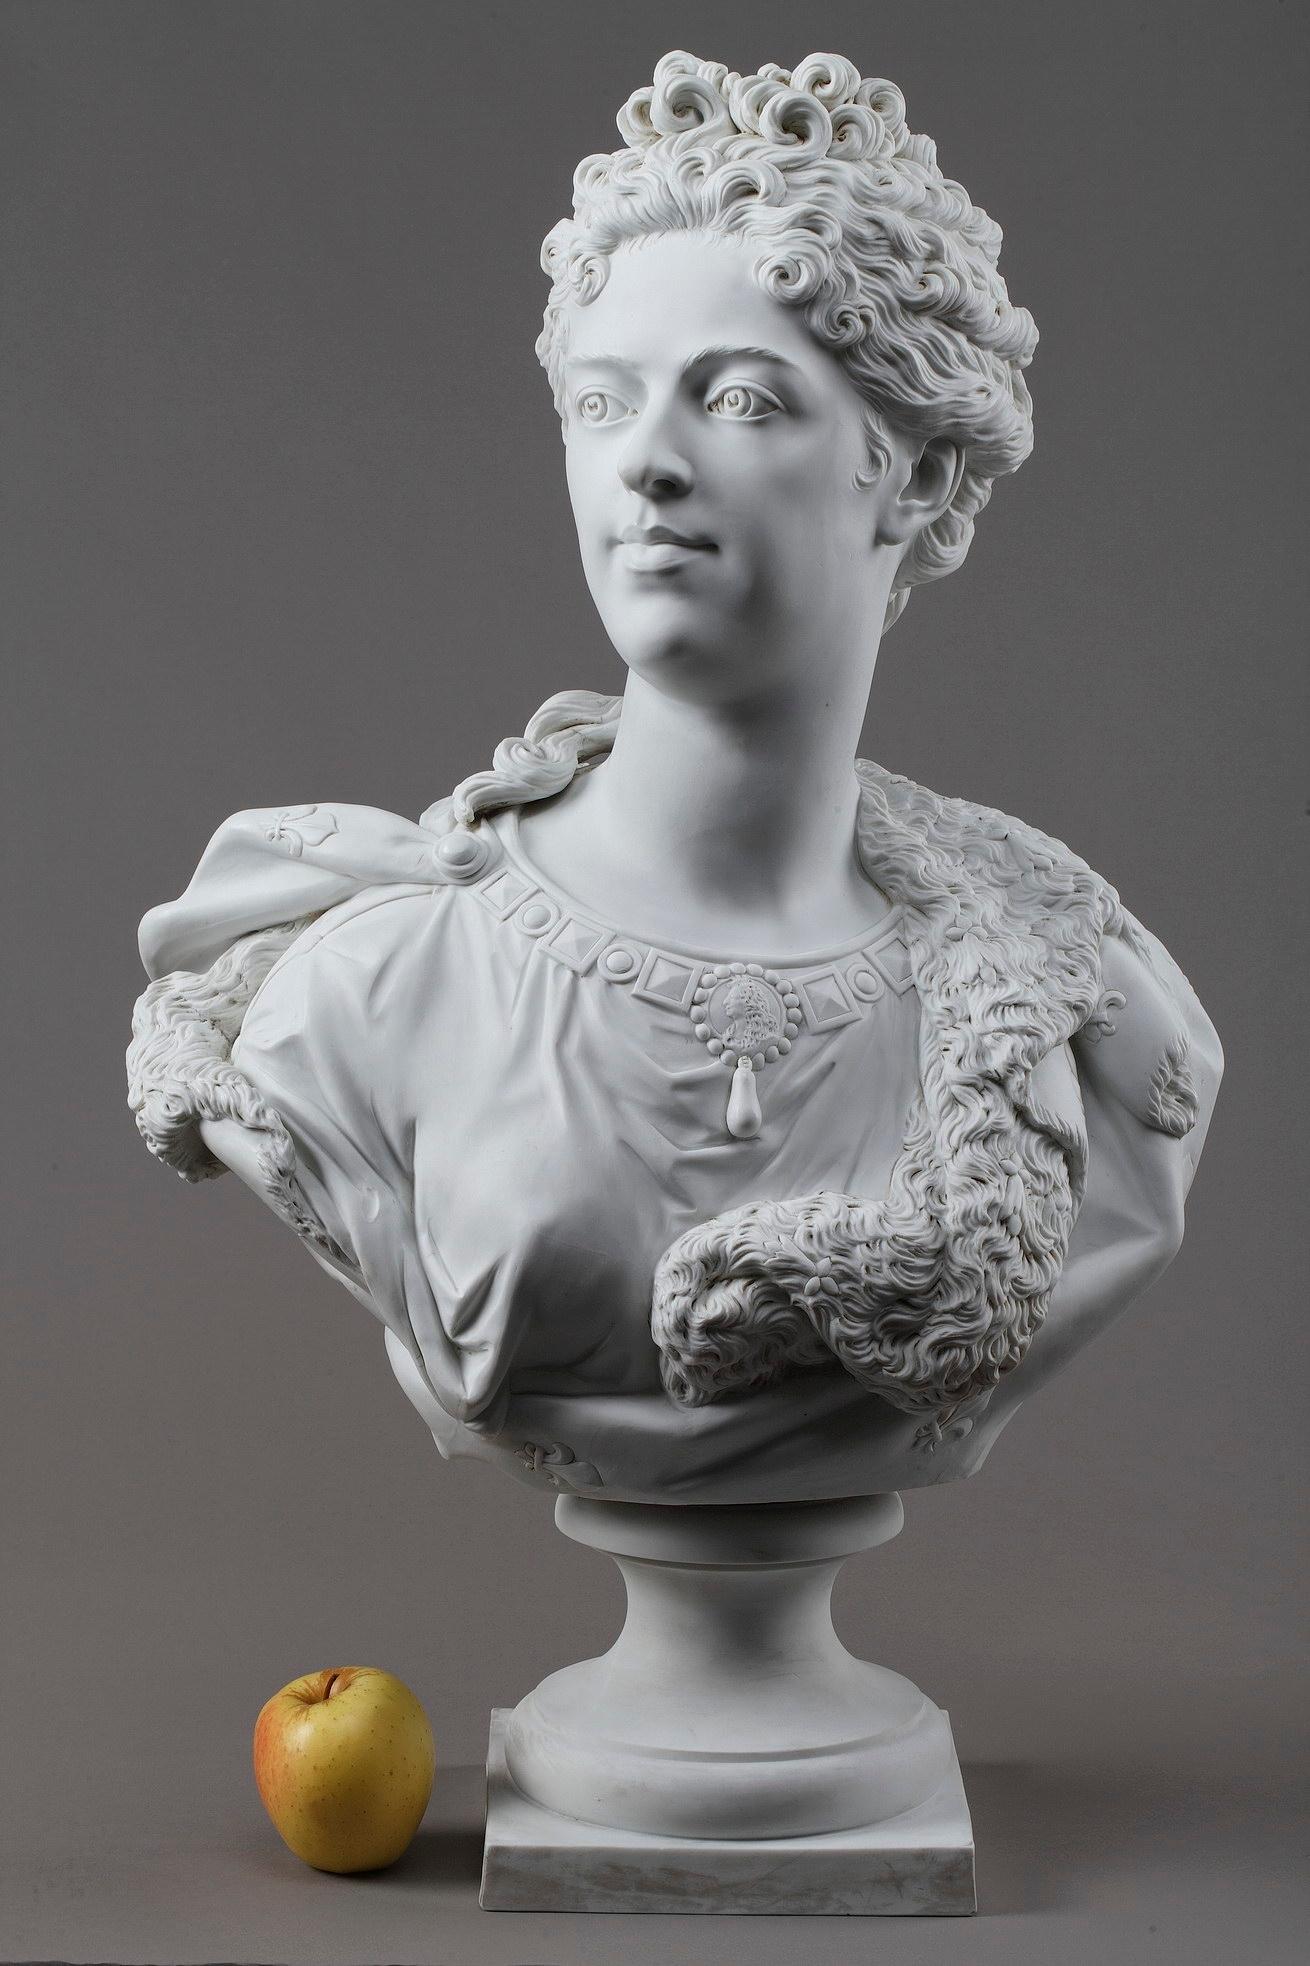 Monumental bisque?porcelain?bust of Marie Adélaïde of Savoy, Duchess of Burgundy after Antoine Coysevox (French, 1640-1720). The original marble was crafted in 1710 and is housed in the Château de Versailles. Marie Adélaïde of Savoy (1685-1712) was